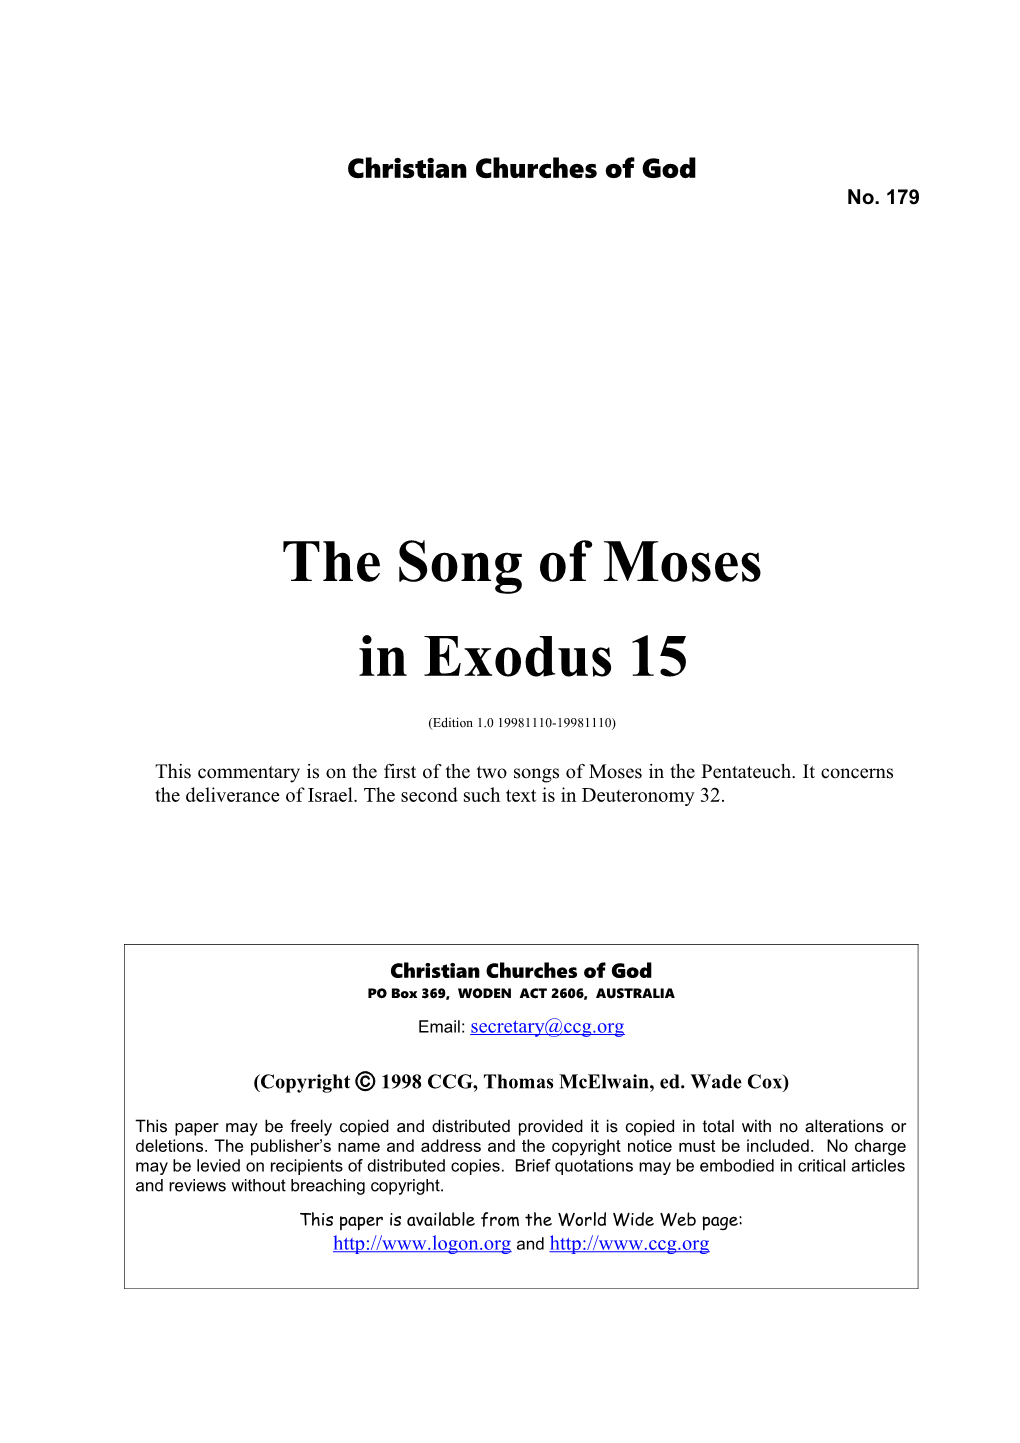 The Song of Moses in Exodus 15 (No. 179)